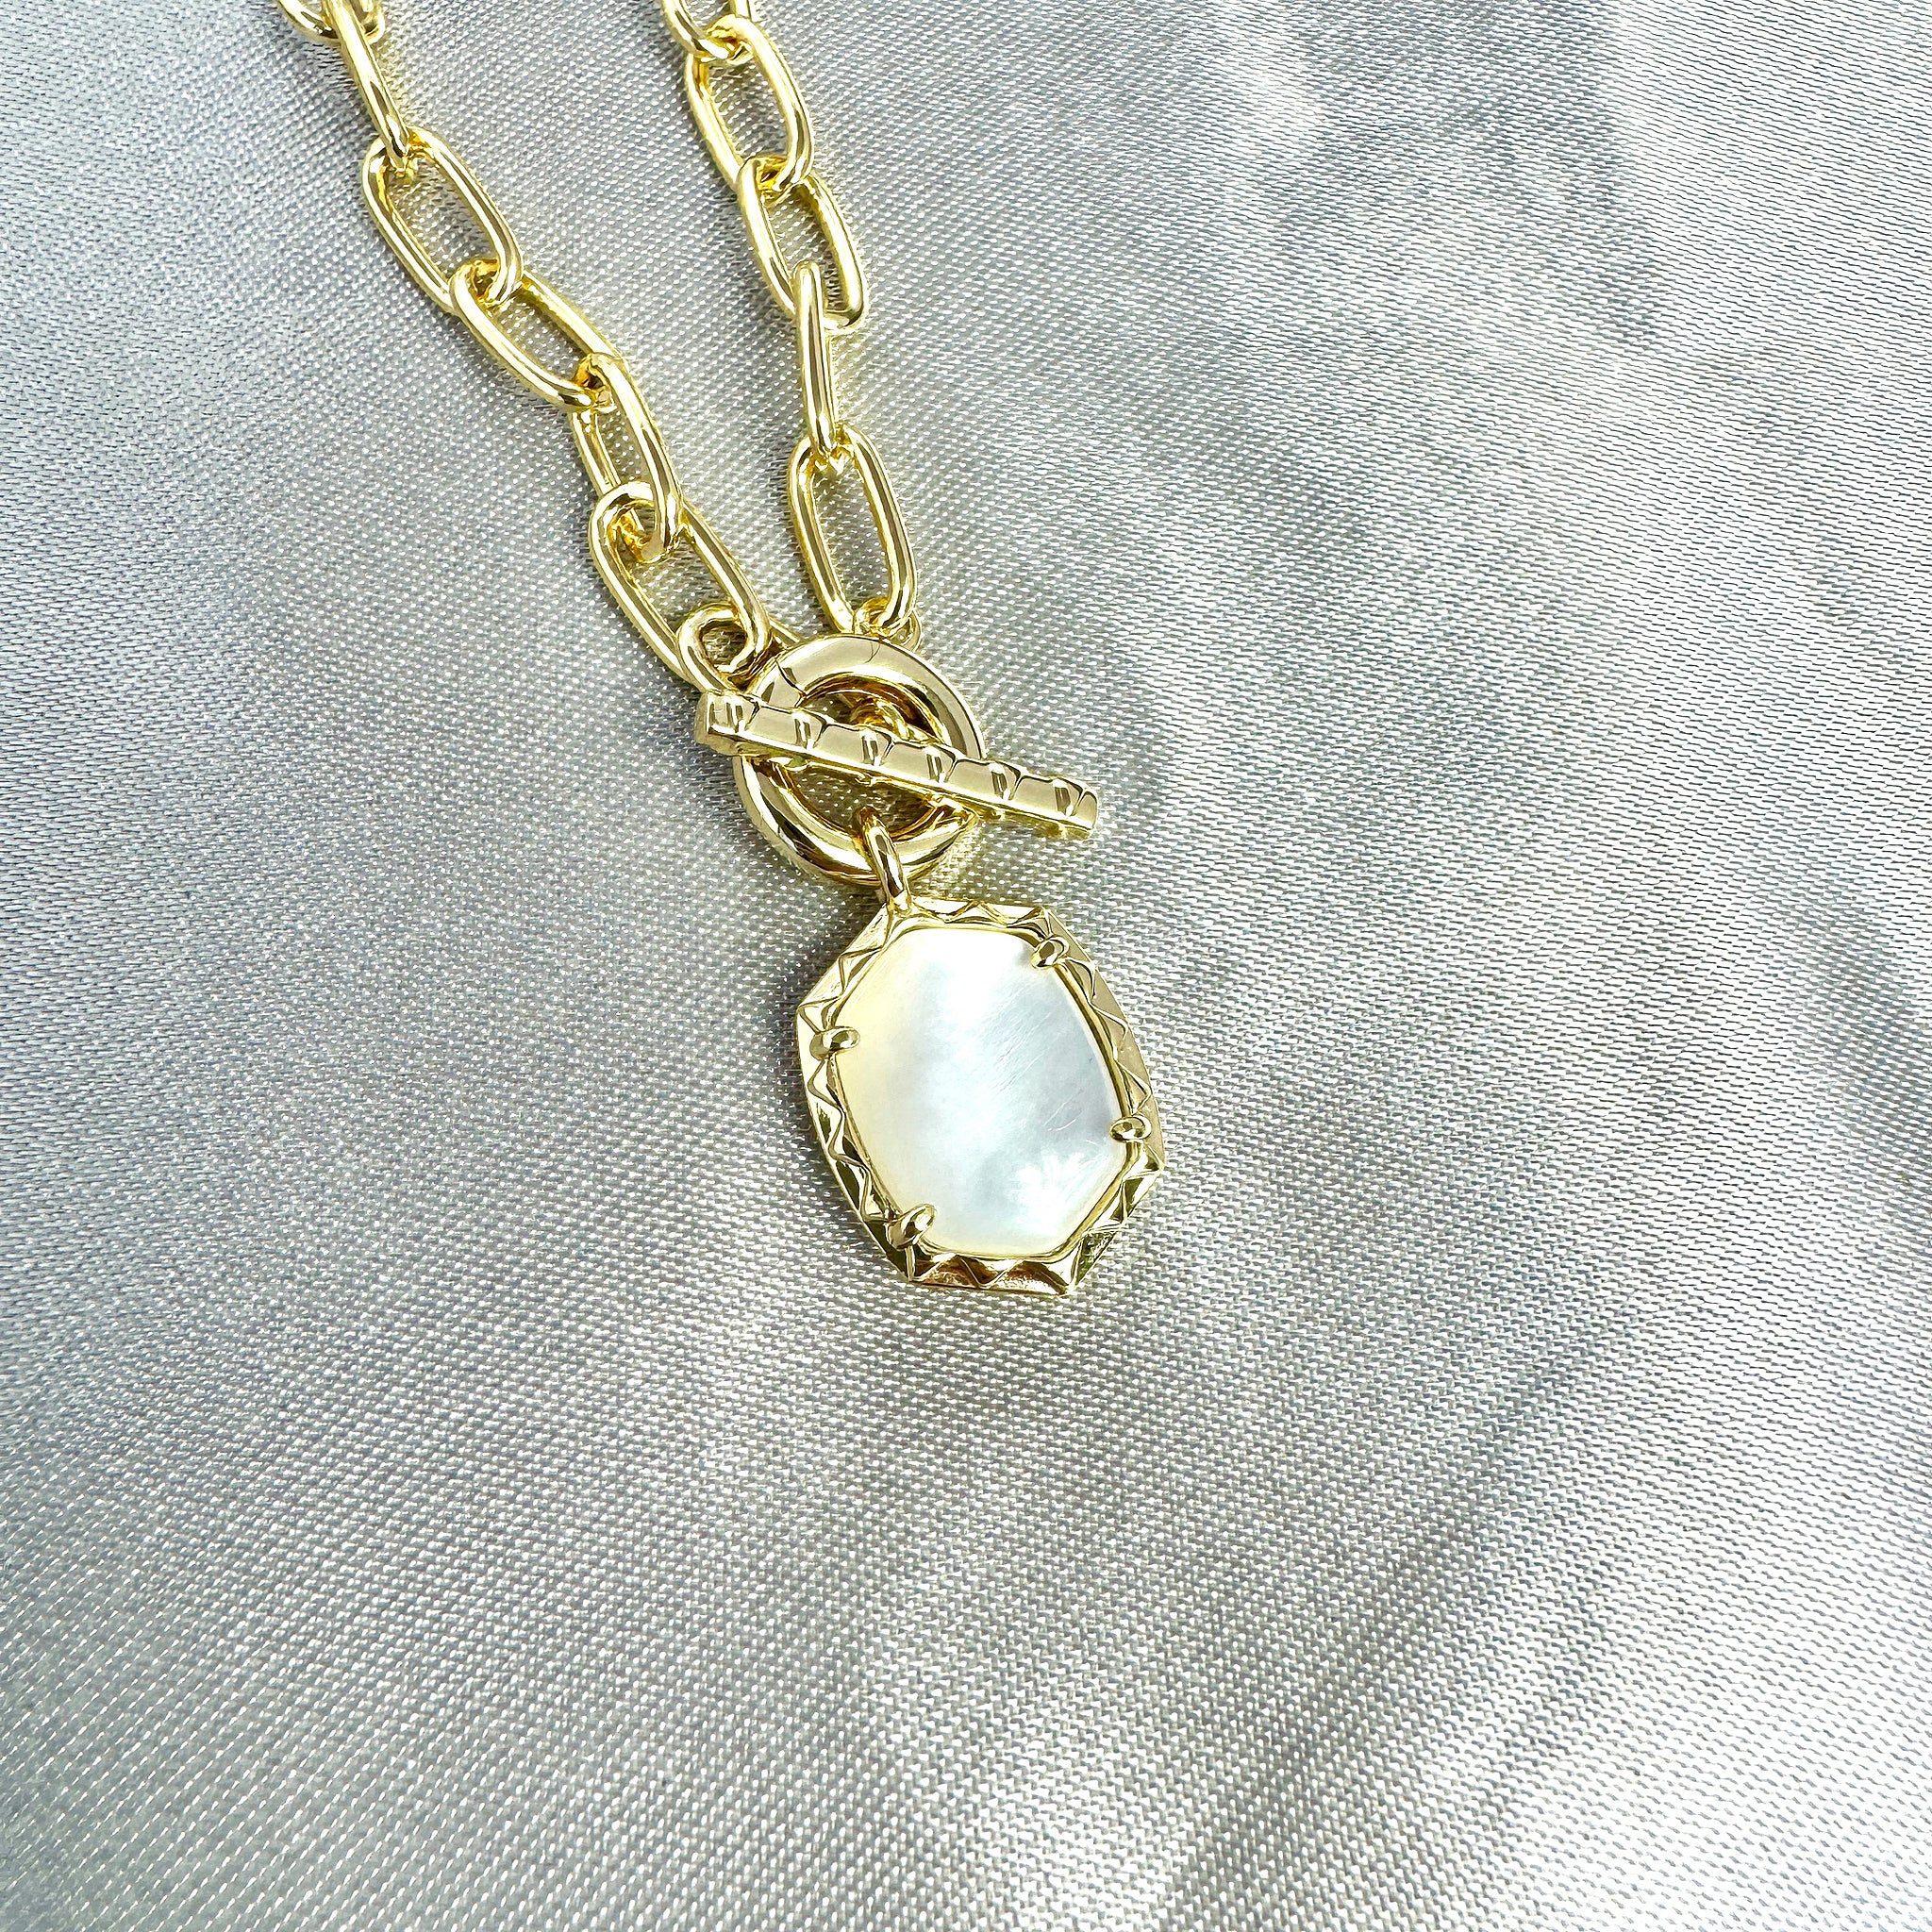 Kendra Scott Daphne Chain Link Pendant Necklace in Ivory Mother of Pearl and Gold